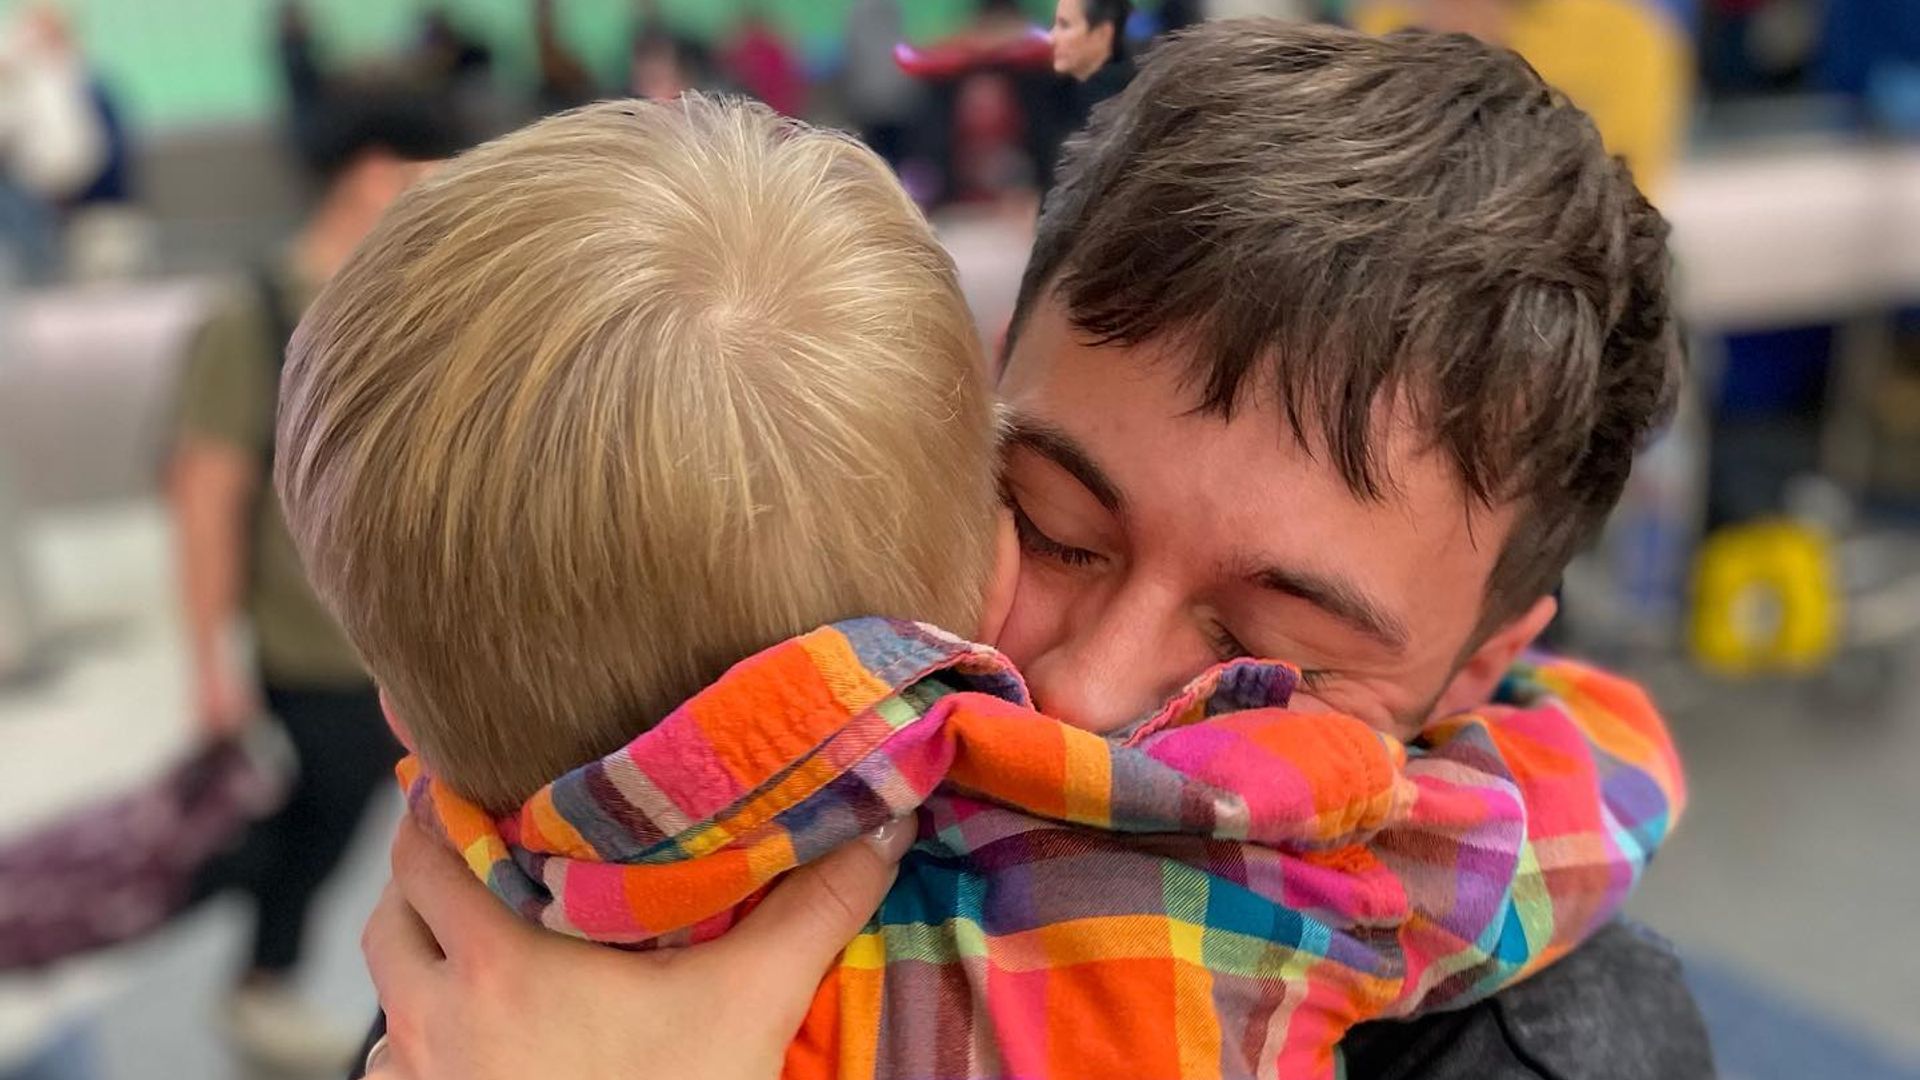 Tom Daley's heartwarming reunion with mini-me son Robbie leaves fans in tears - watch